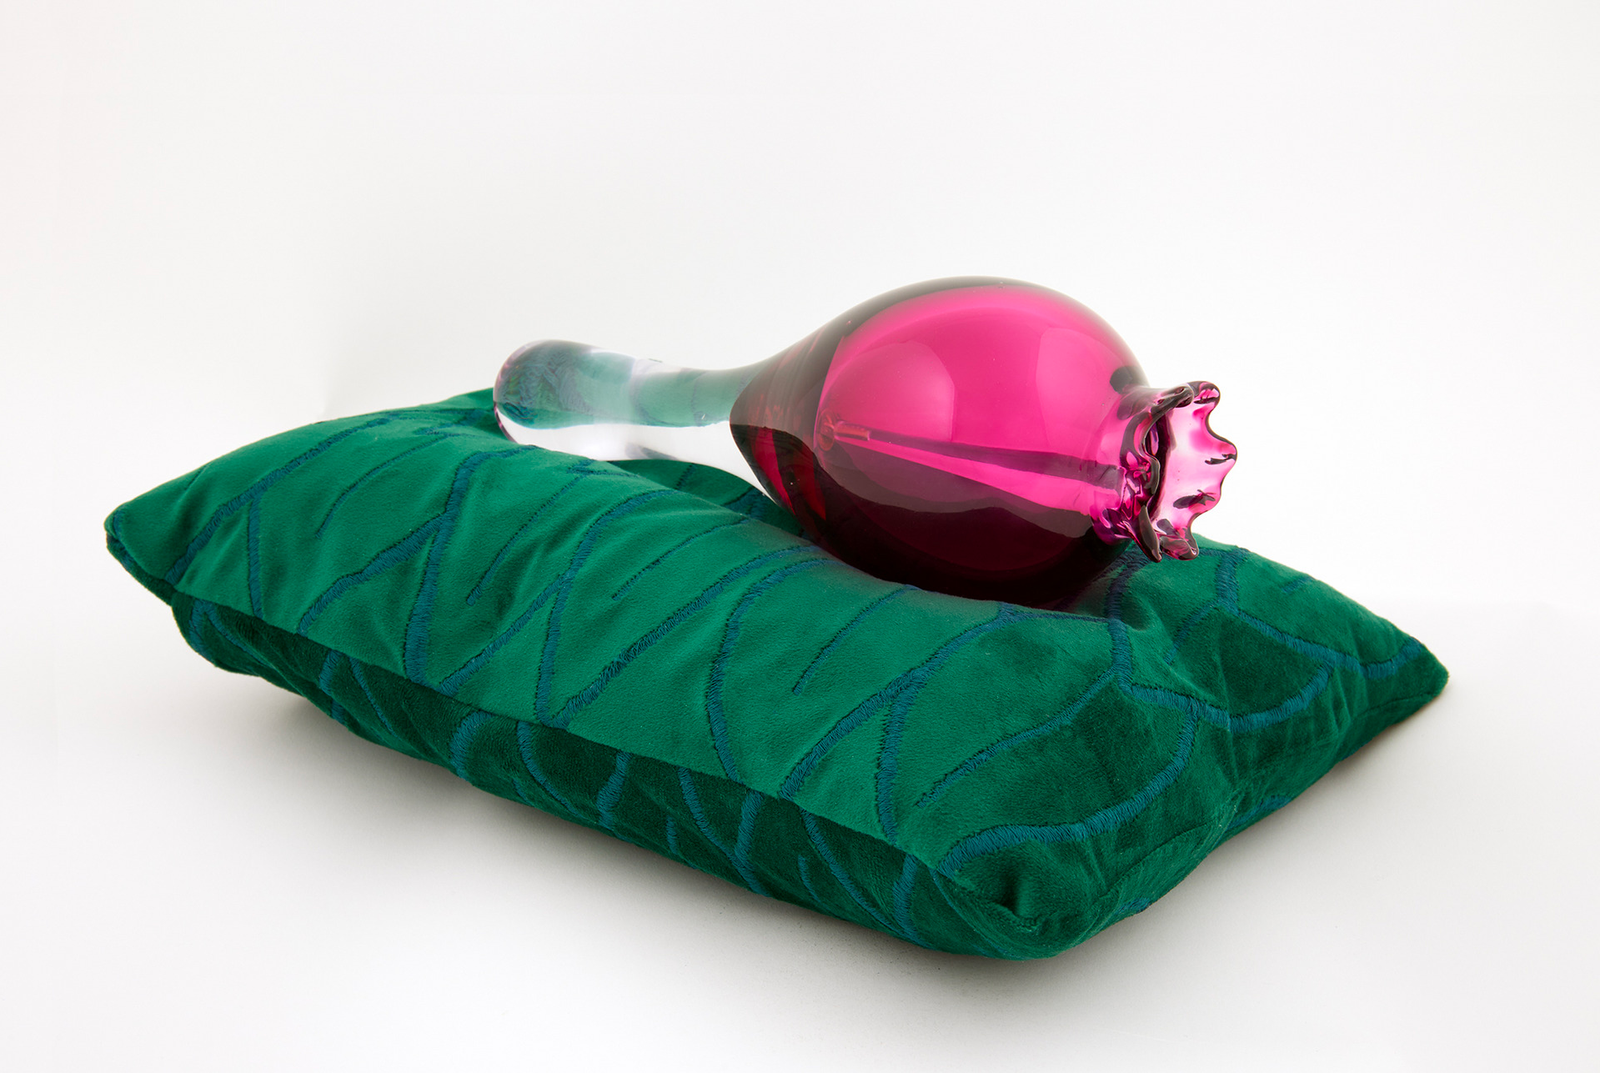 A glass pomegranate bell on a green velvet cushion, with leaf embroidery